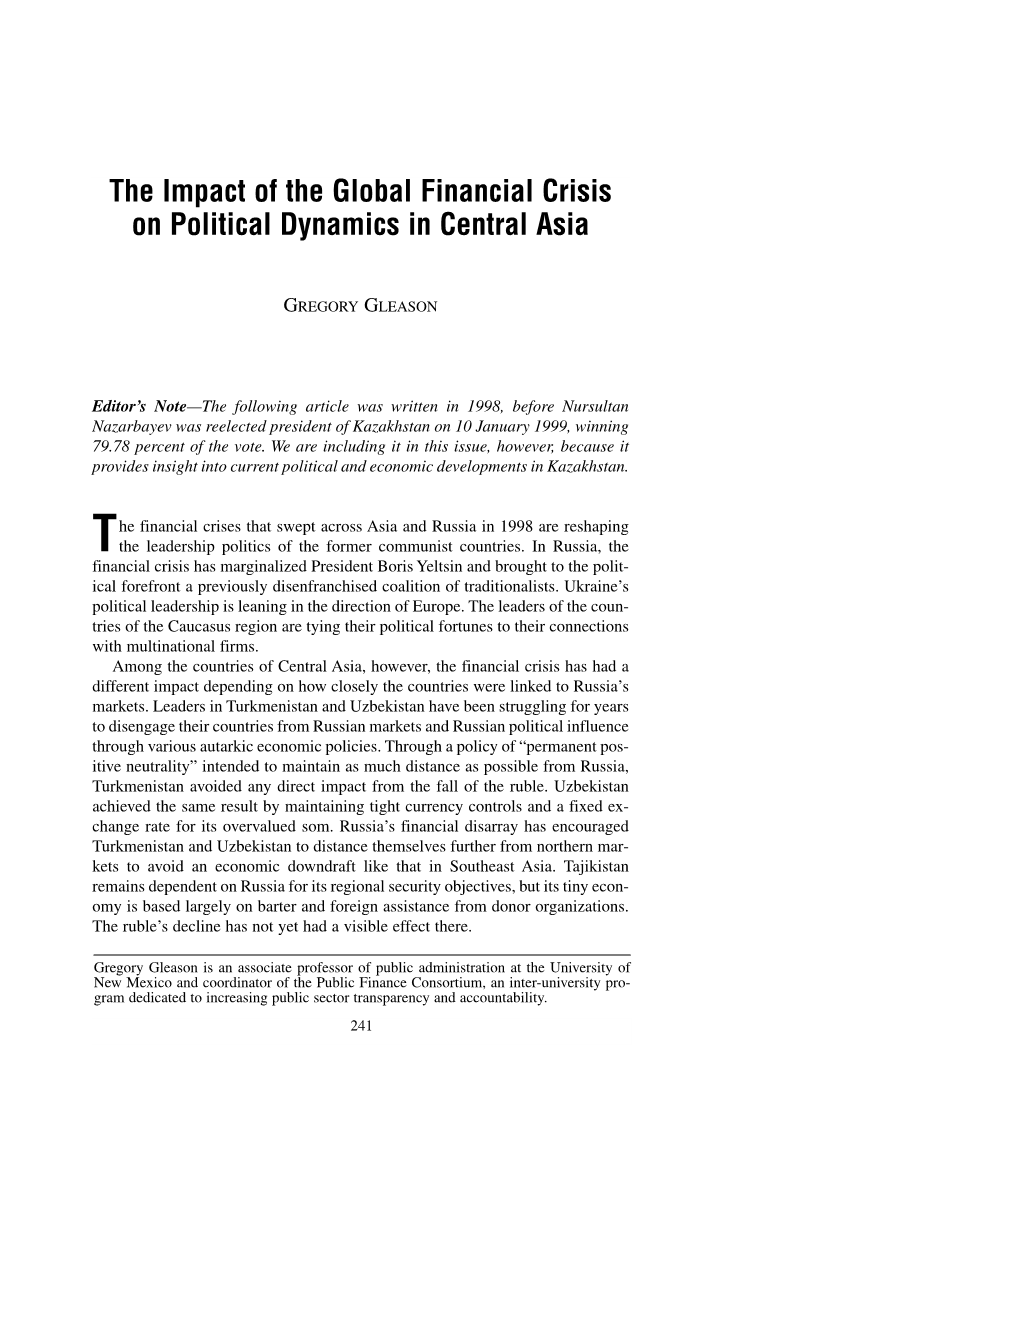 The Impact of the Global Financial Crisis on Political Dynamics in Central Asia